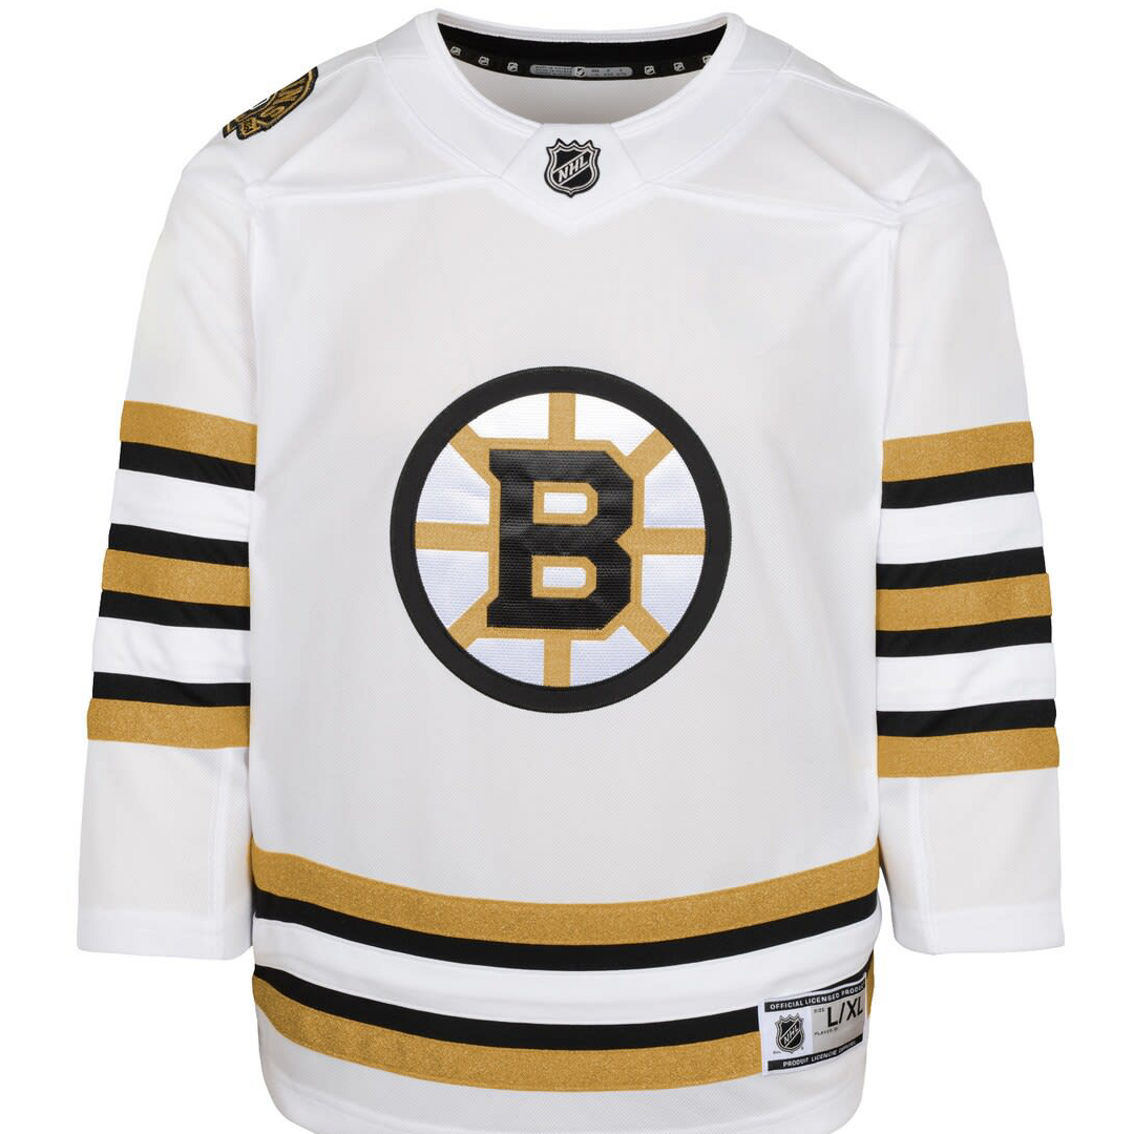 Outerstuff Youth White Boston Bruins 100th Anniversary Premier Jersey - Image 3 of 4